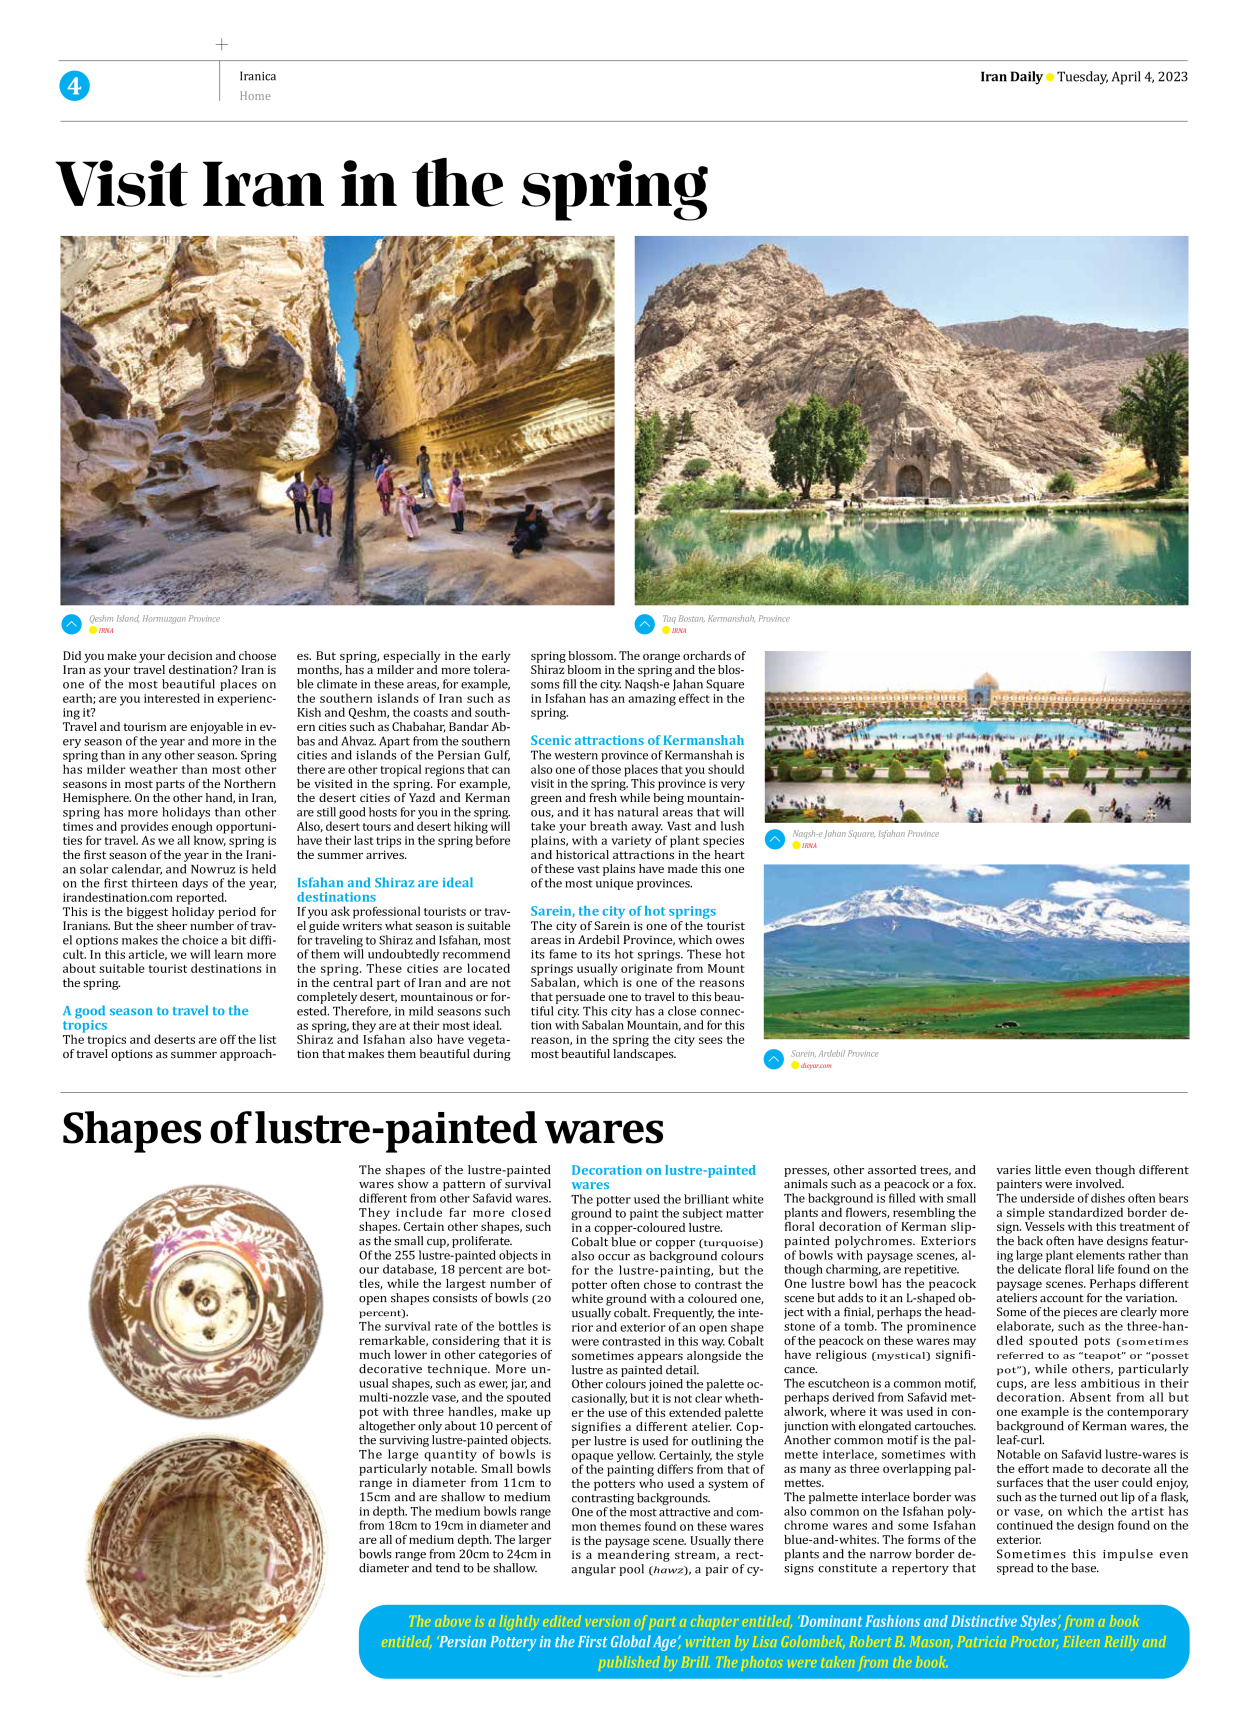 Iran Daily - Number Seven Thousand Two Hundred and Sixty One - 04 April 2023 - Page 4